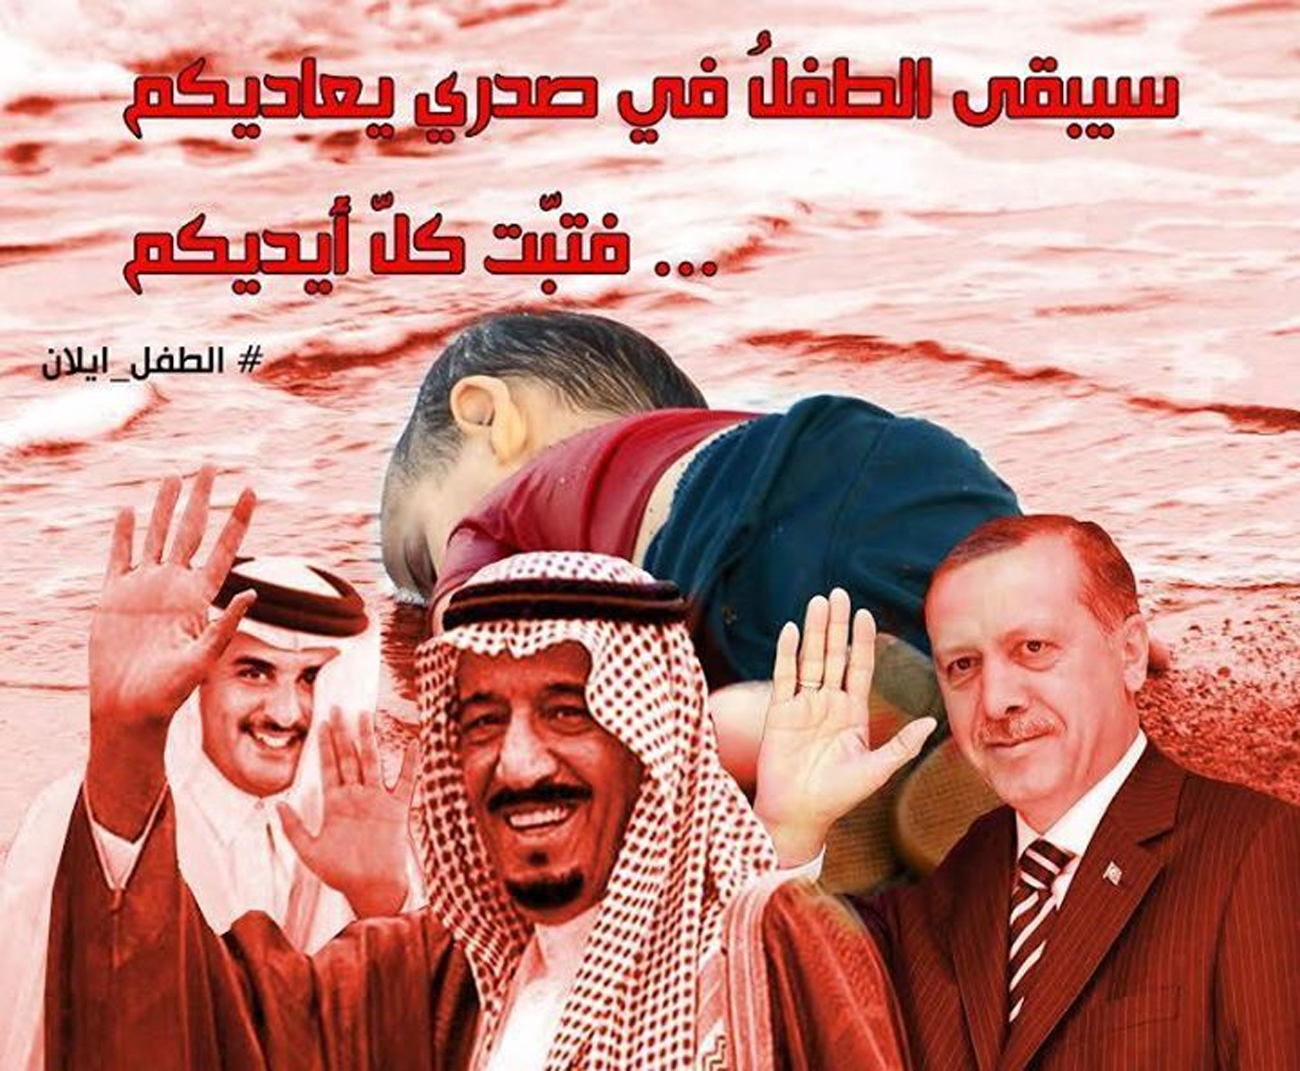 'What did you do for him' Erdogan, the Saudi King, and the Emir of Qatar